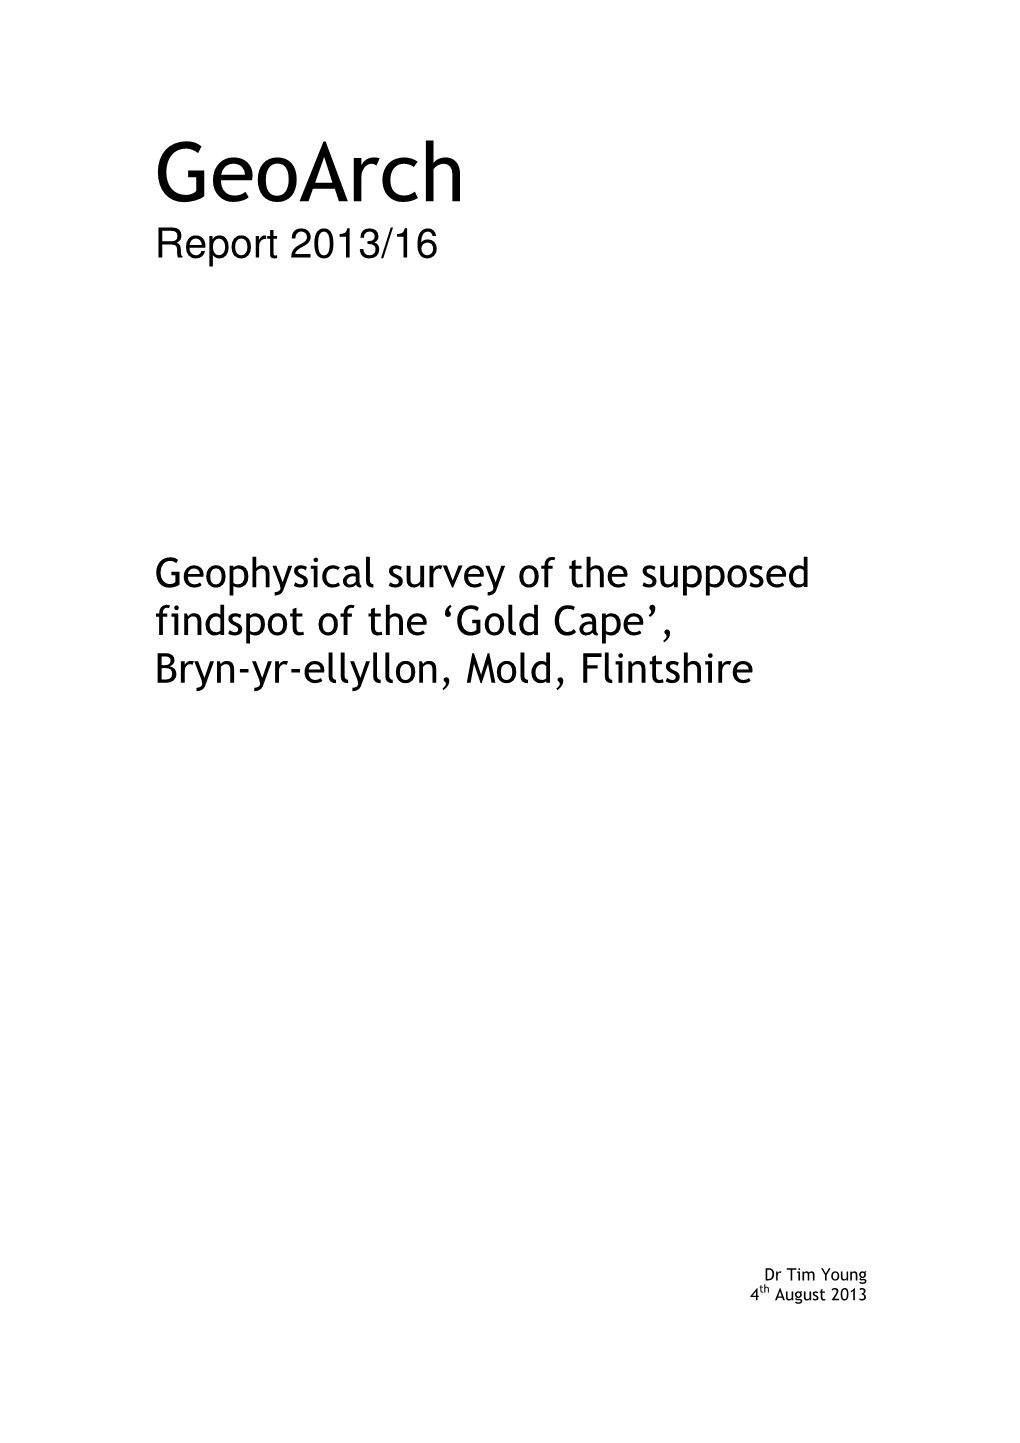 Geoarch Report 2013/16